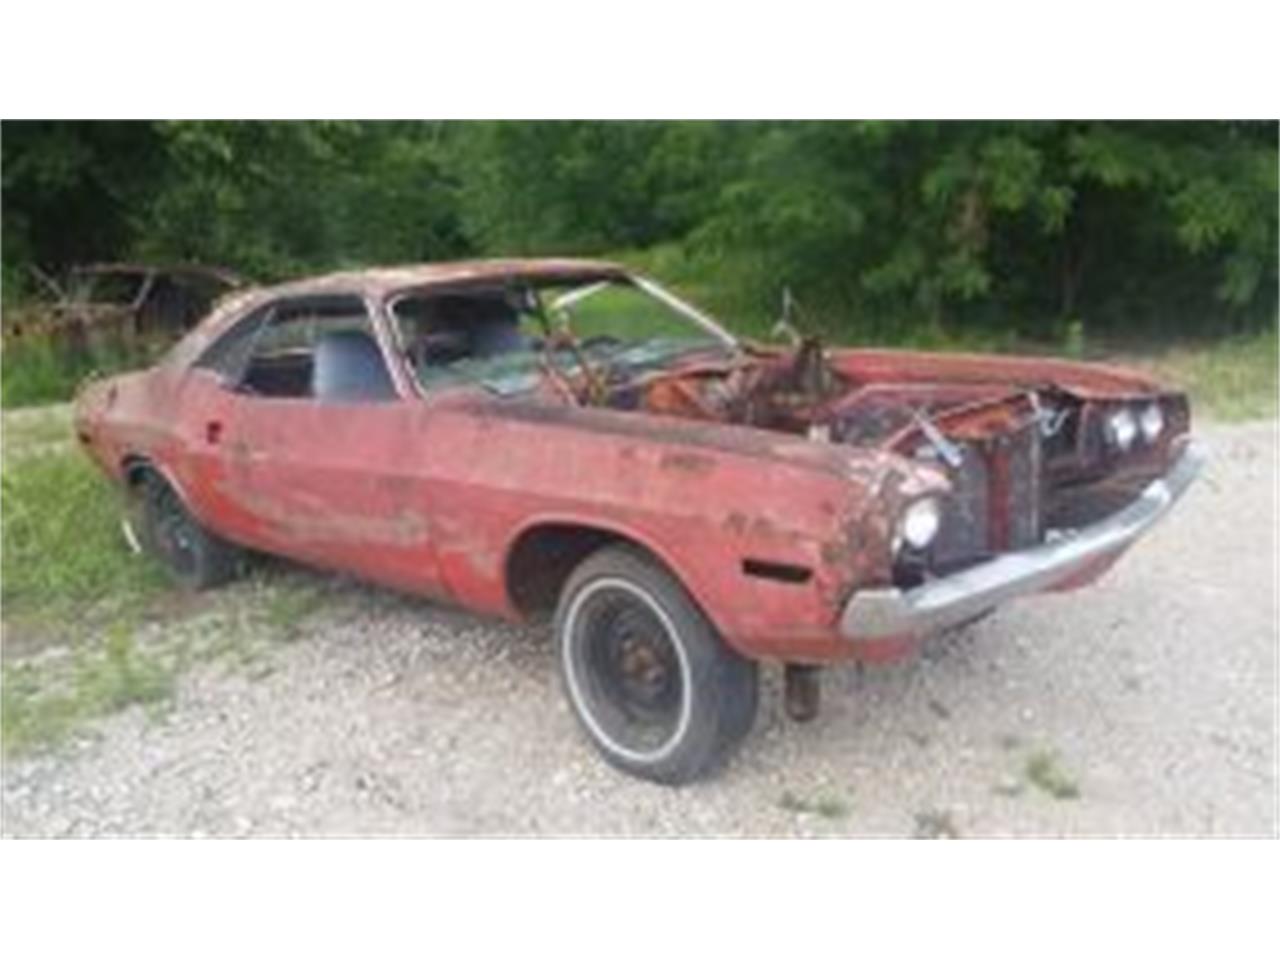 1970 Dodge Challenger for sale in Cadillac, MI